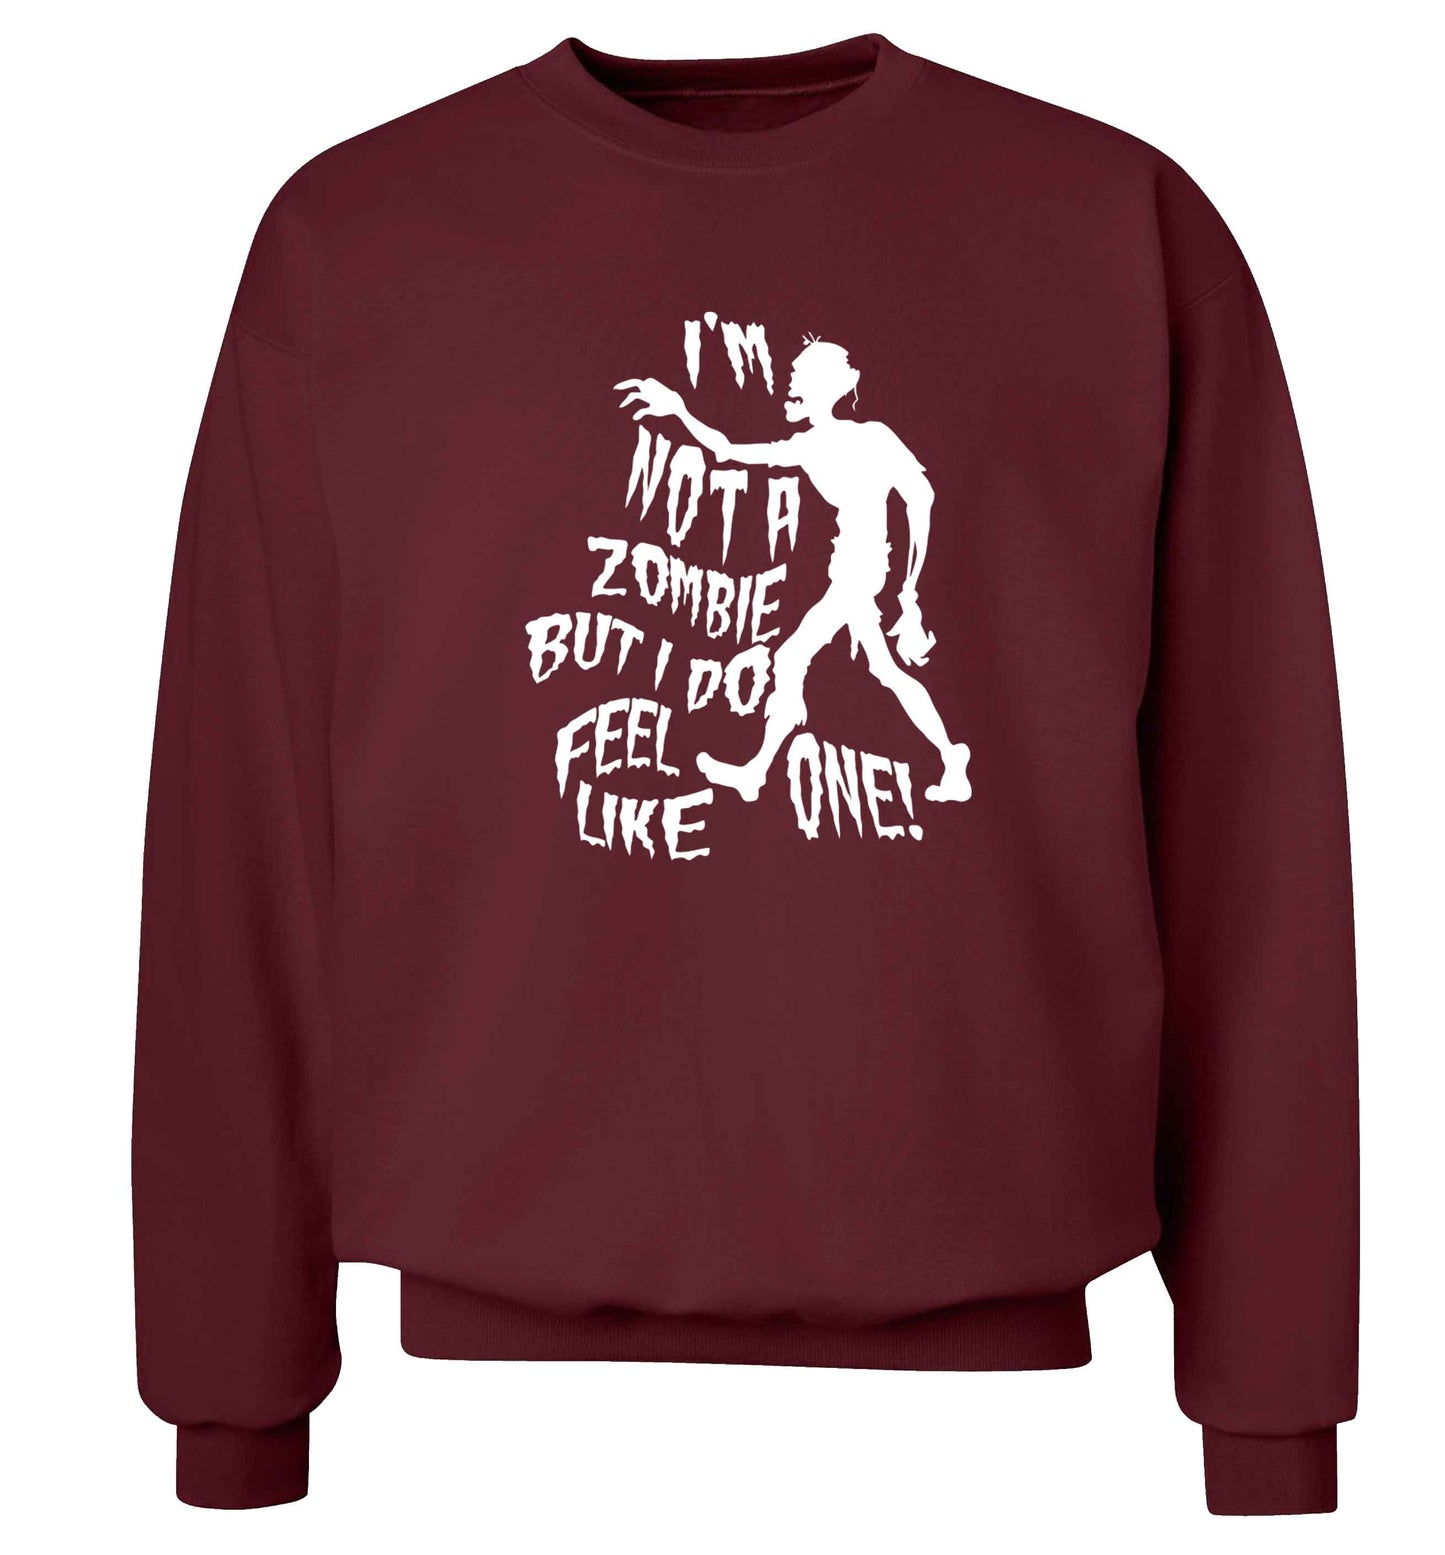 I'm not a zombie but I do feel like one! Adult's unisex maroon Sweater 2XL